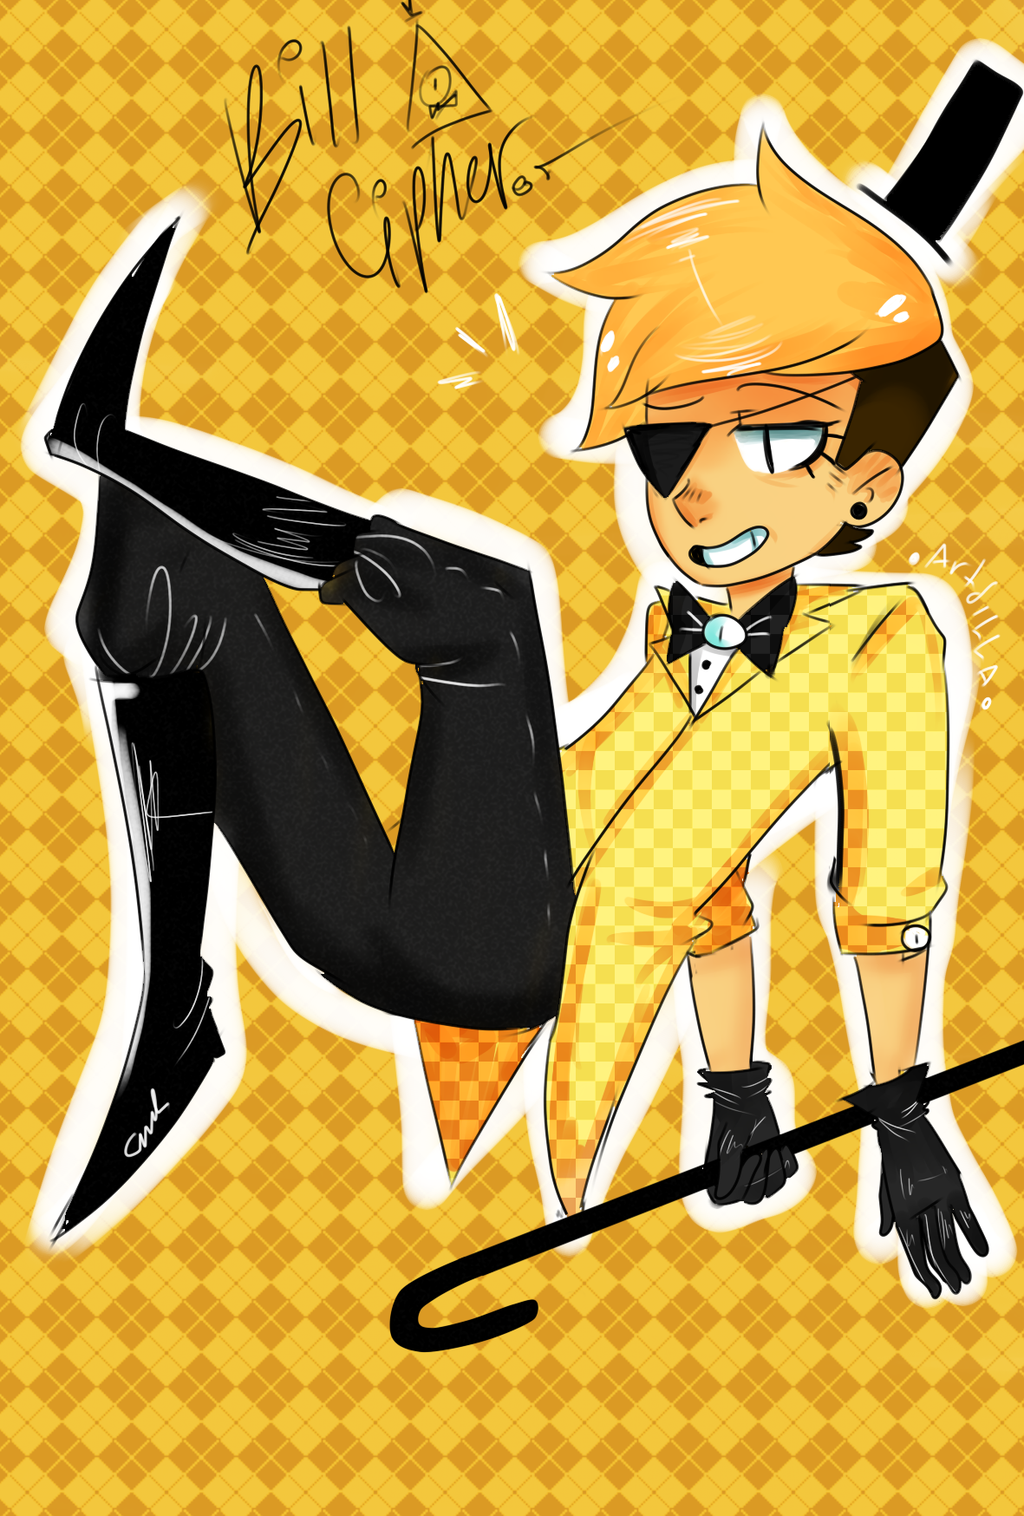 Well Well [HumanBill Cipher] by CamiiStyles on